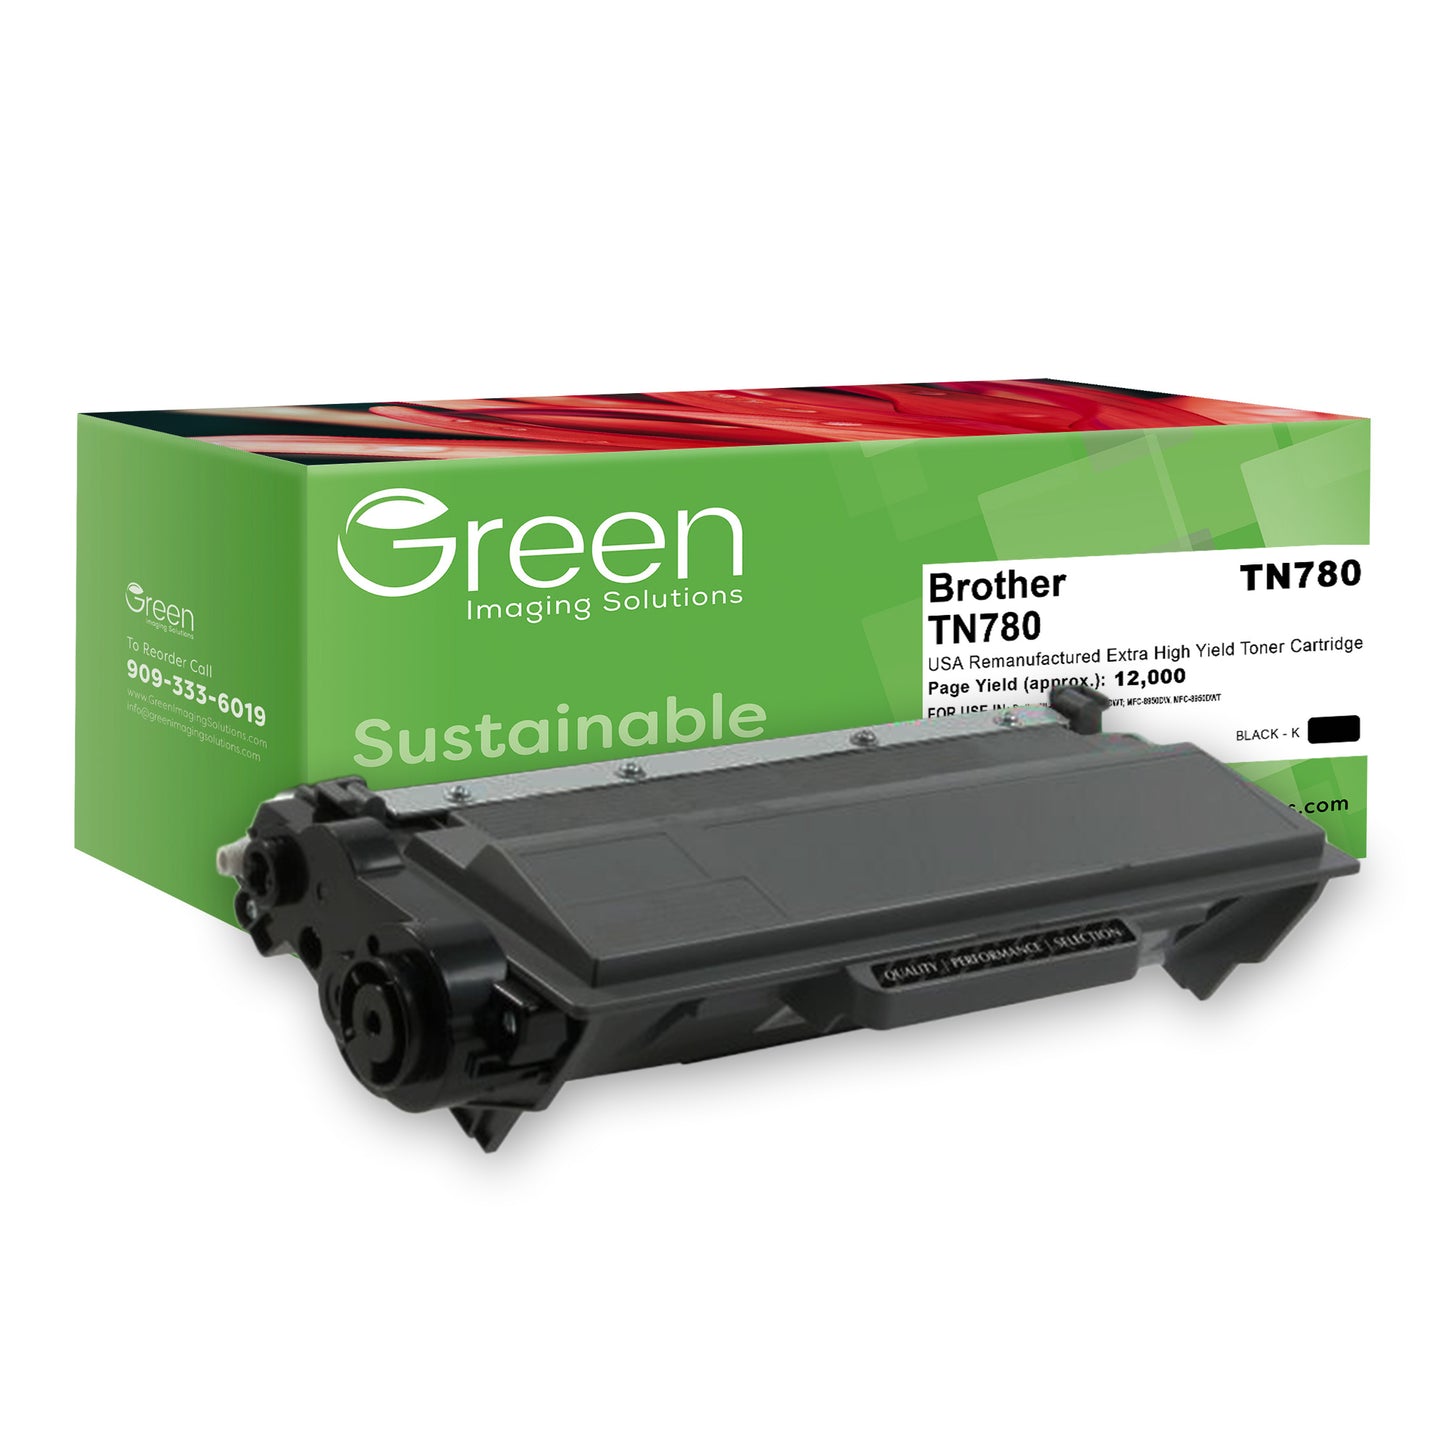 Green Imaging Solutions USA Remanufactured Extra High Yield Toner Cartridge for Brother TN780